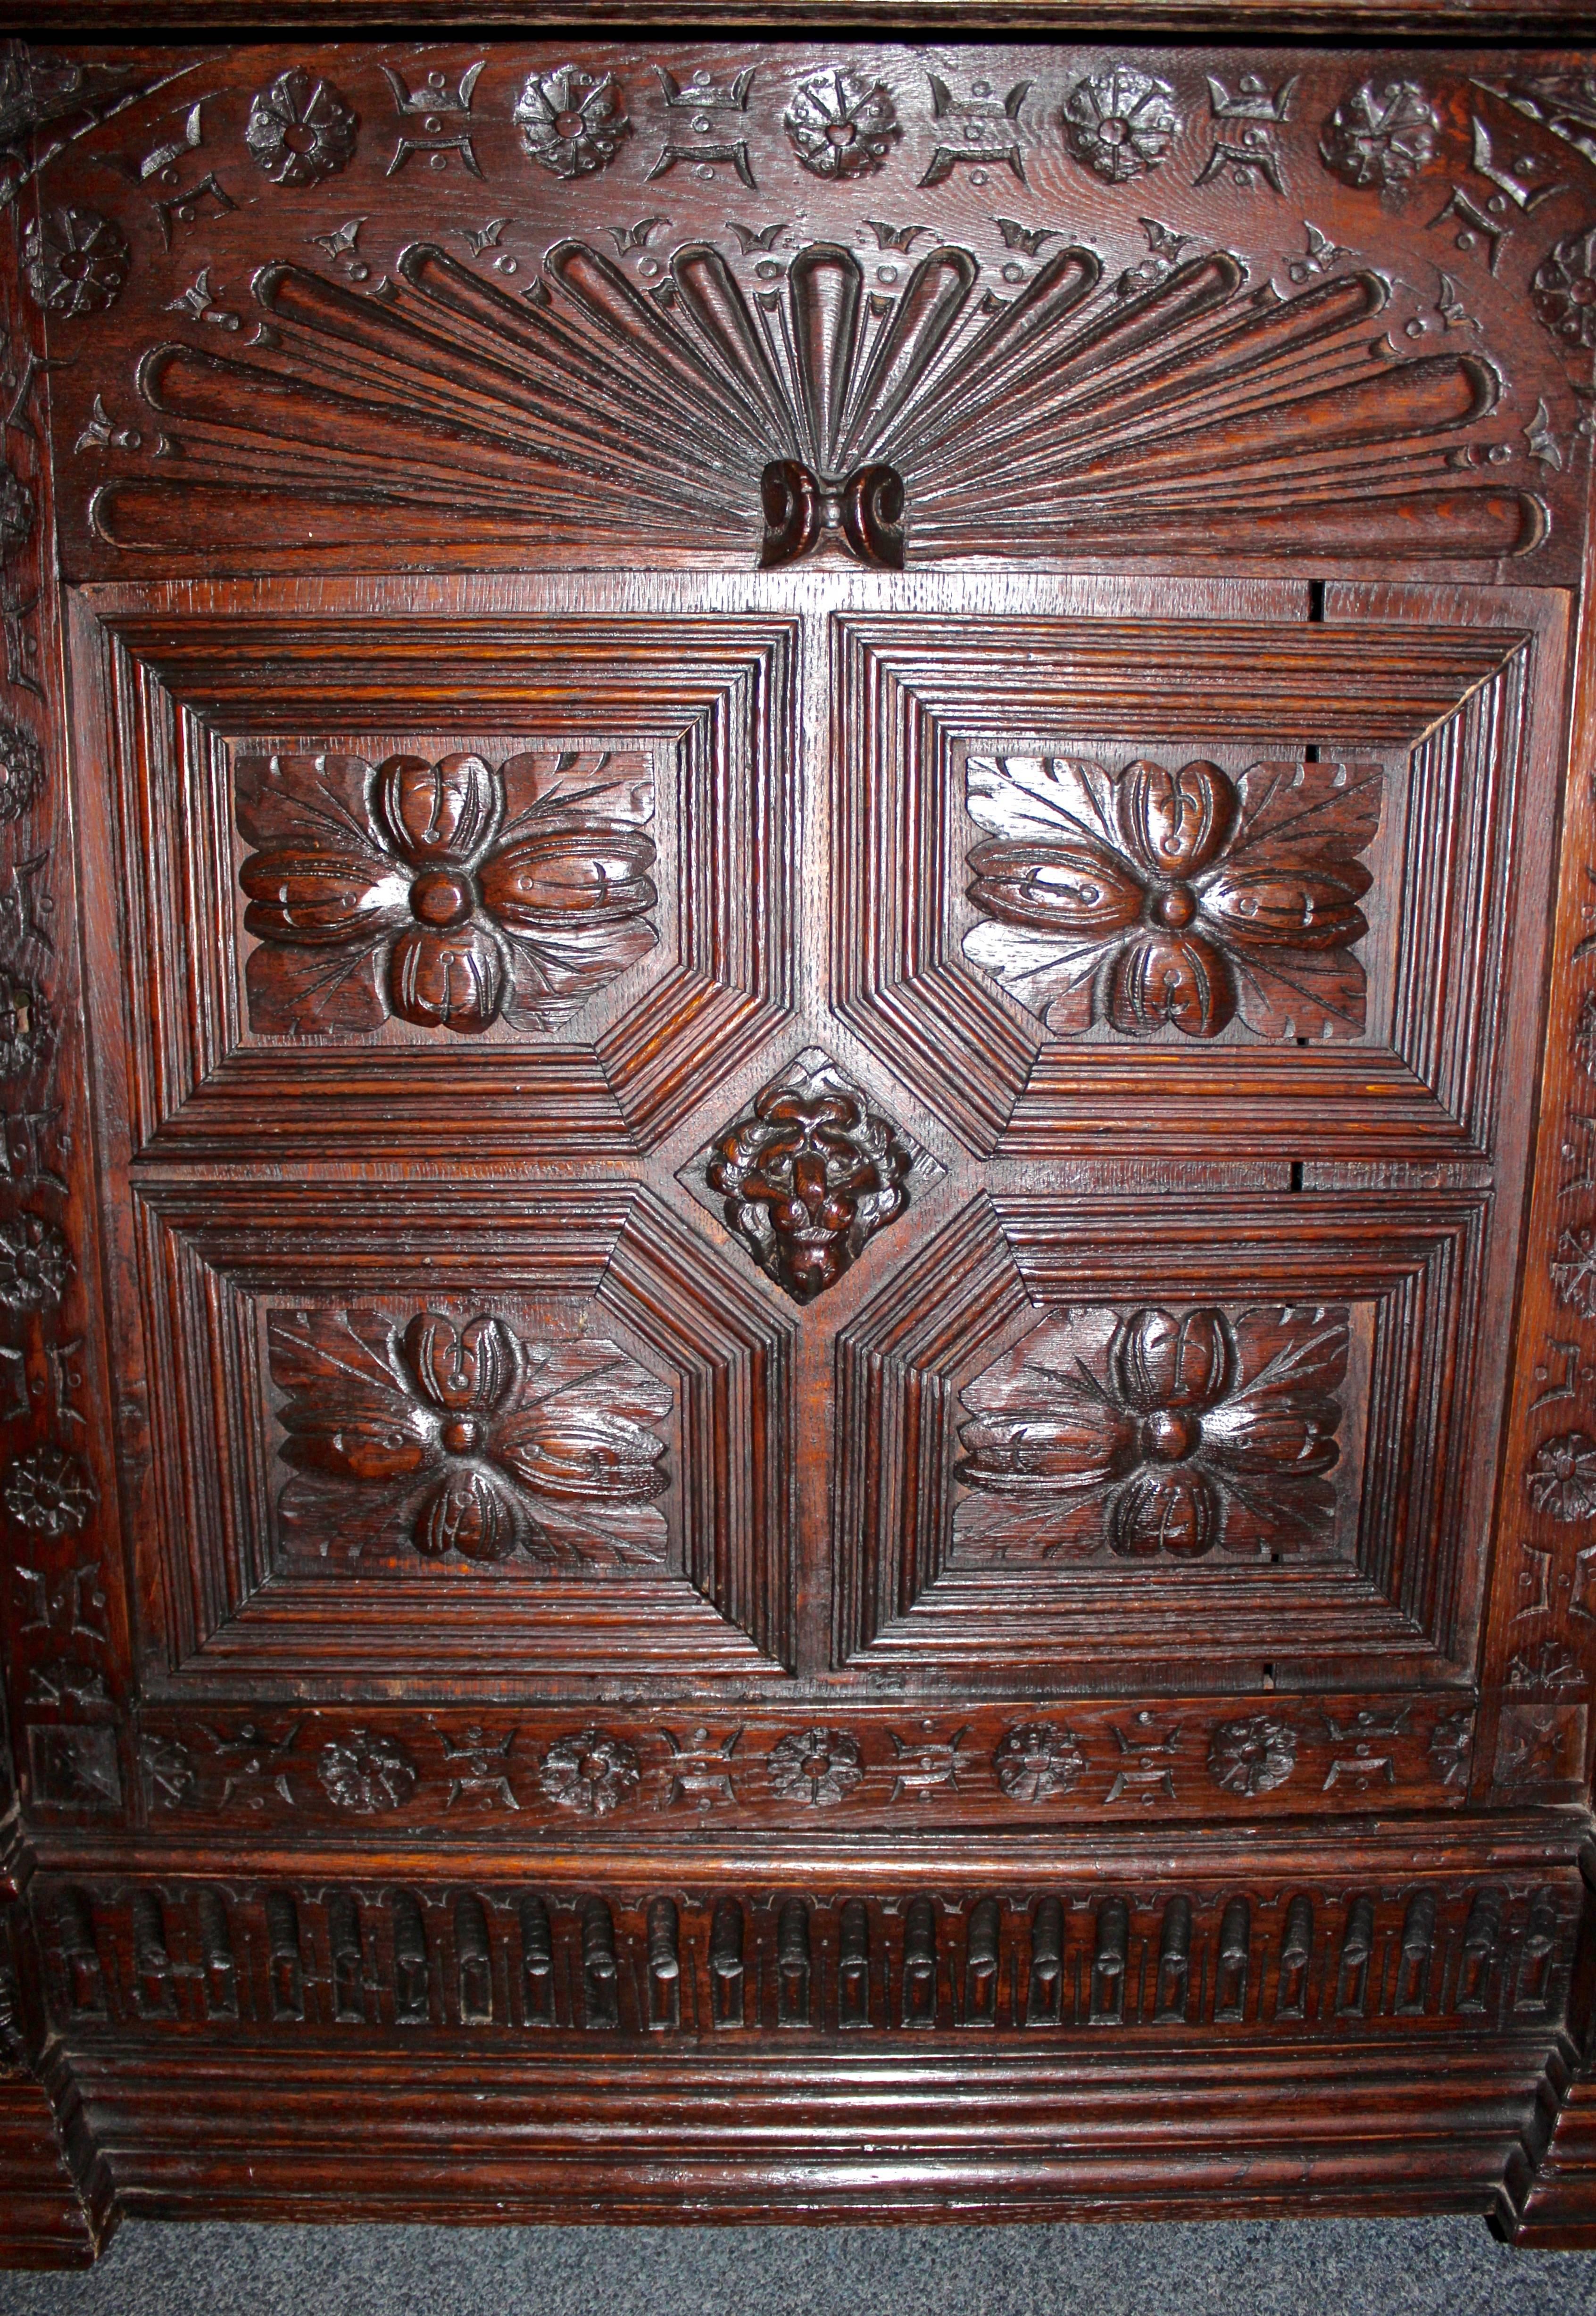 This French cabinet is made in the Renaissance style.  It is hand-carved from oak and features intricate carvings reminiscent of the style.  Storage in the piece includes an upper pull-out drawer and a lower cabinet with a shelf.